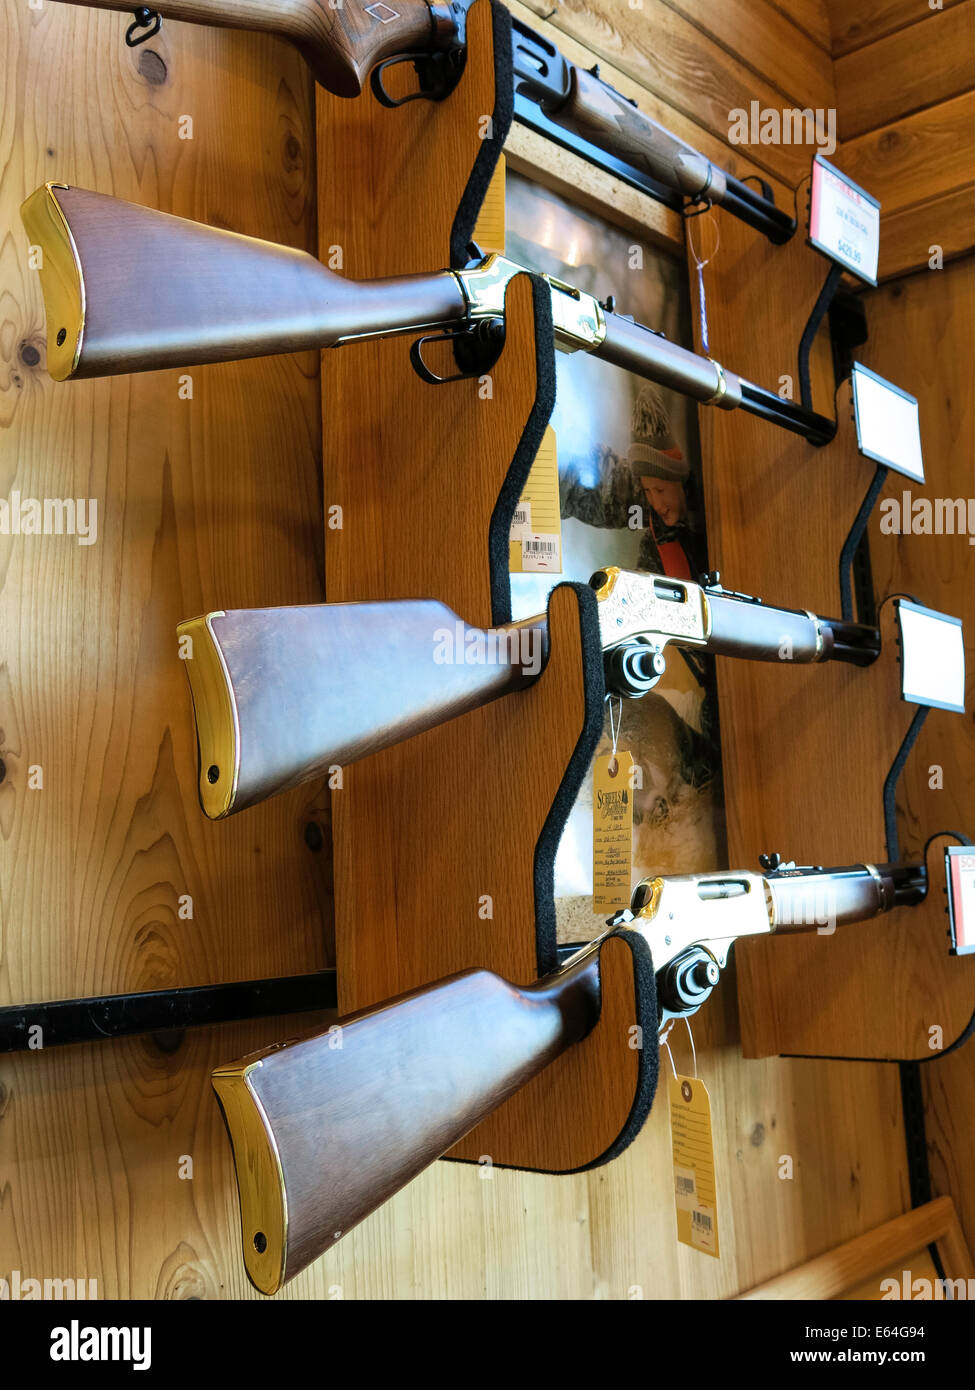 Lever Action Rifles, Scheels Sporting Goods Store, Great Falls, Montana, USA Stock Photo